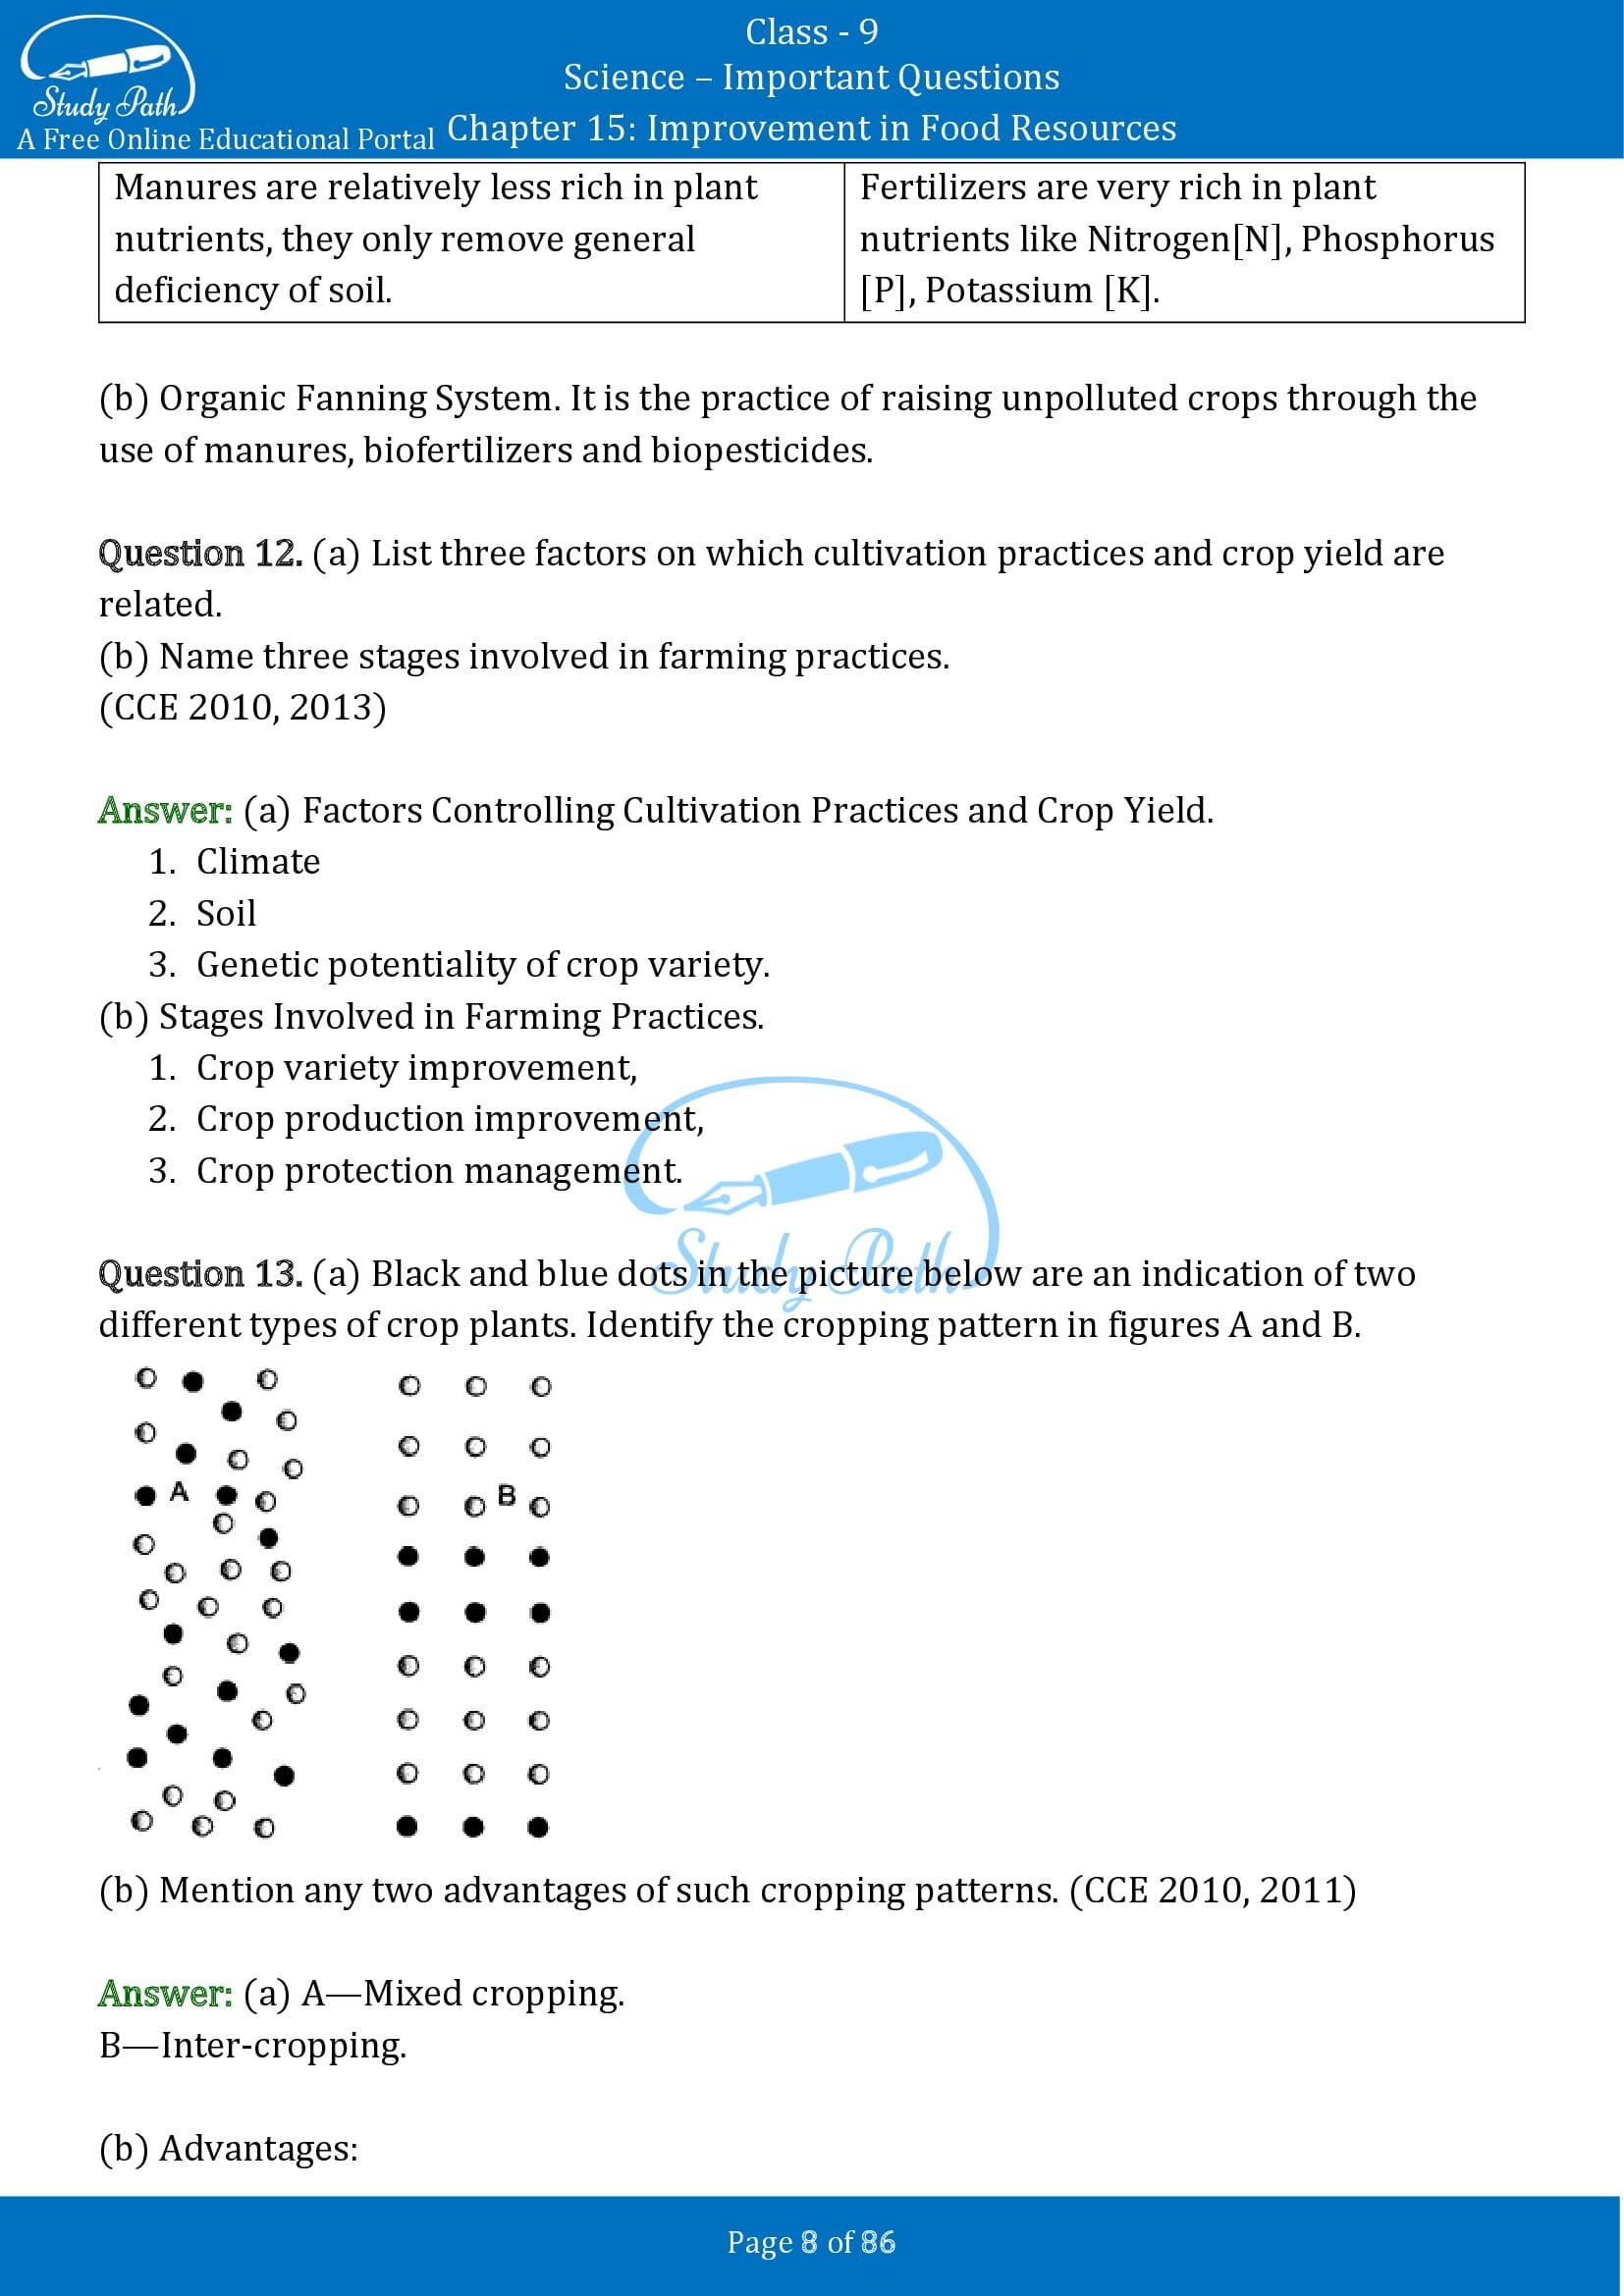 Important Questions for Class 9 Science Chapter 15 Improvement in Food Resources 00008